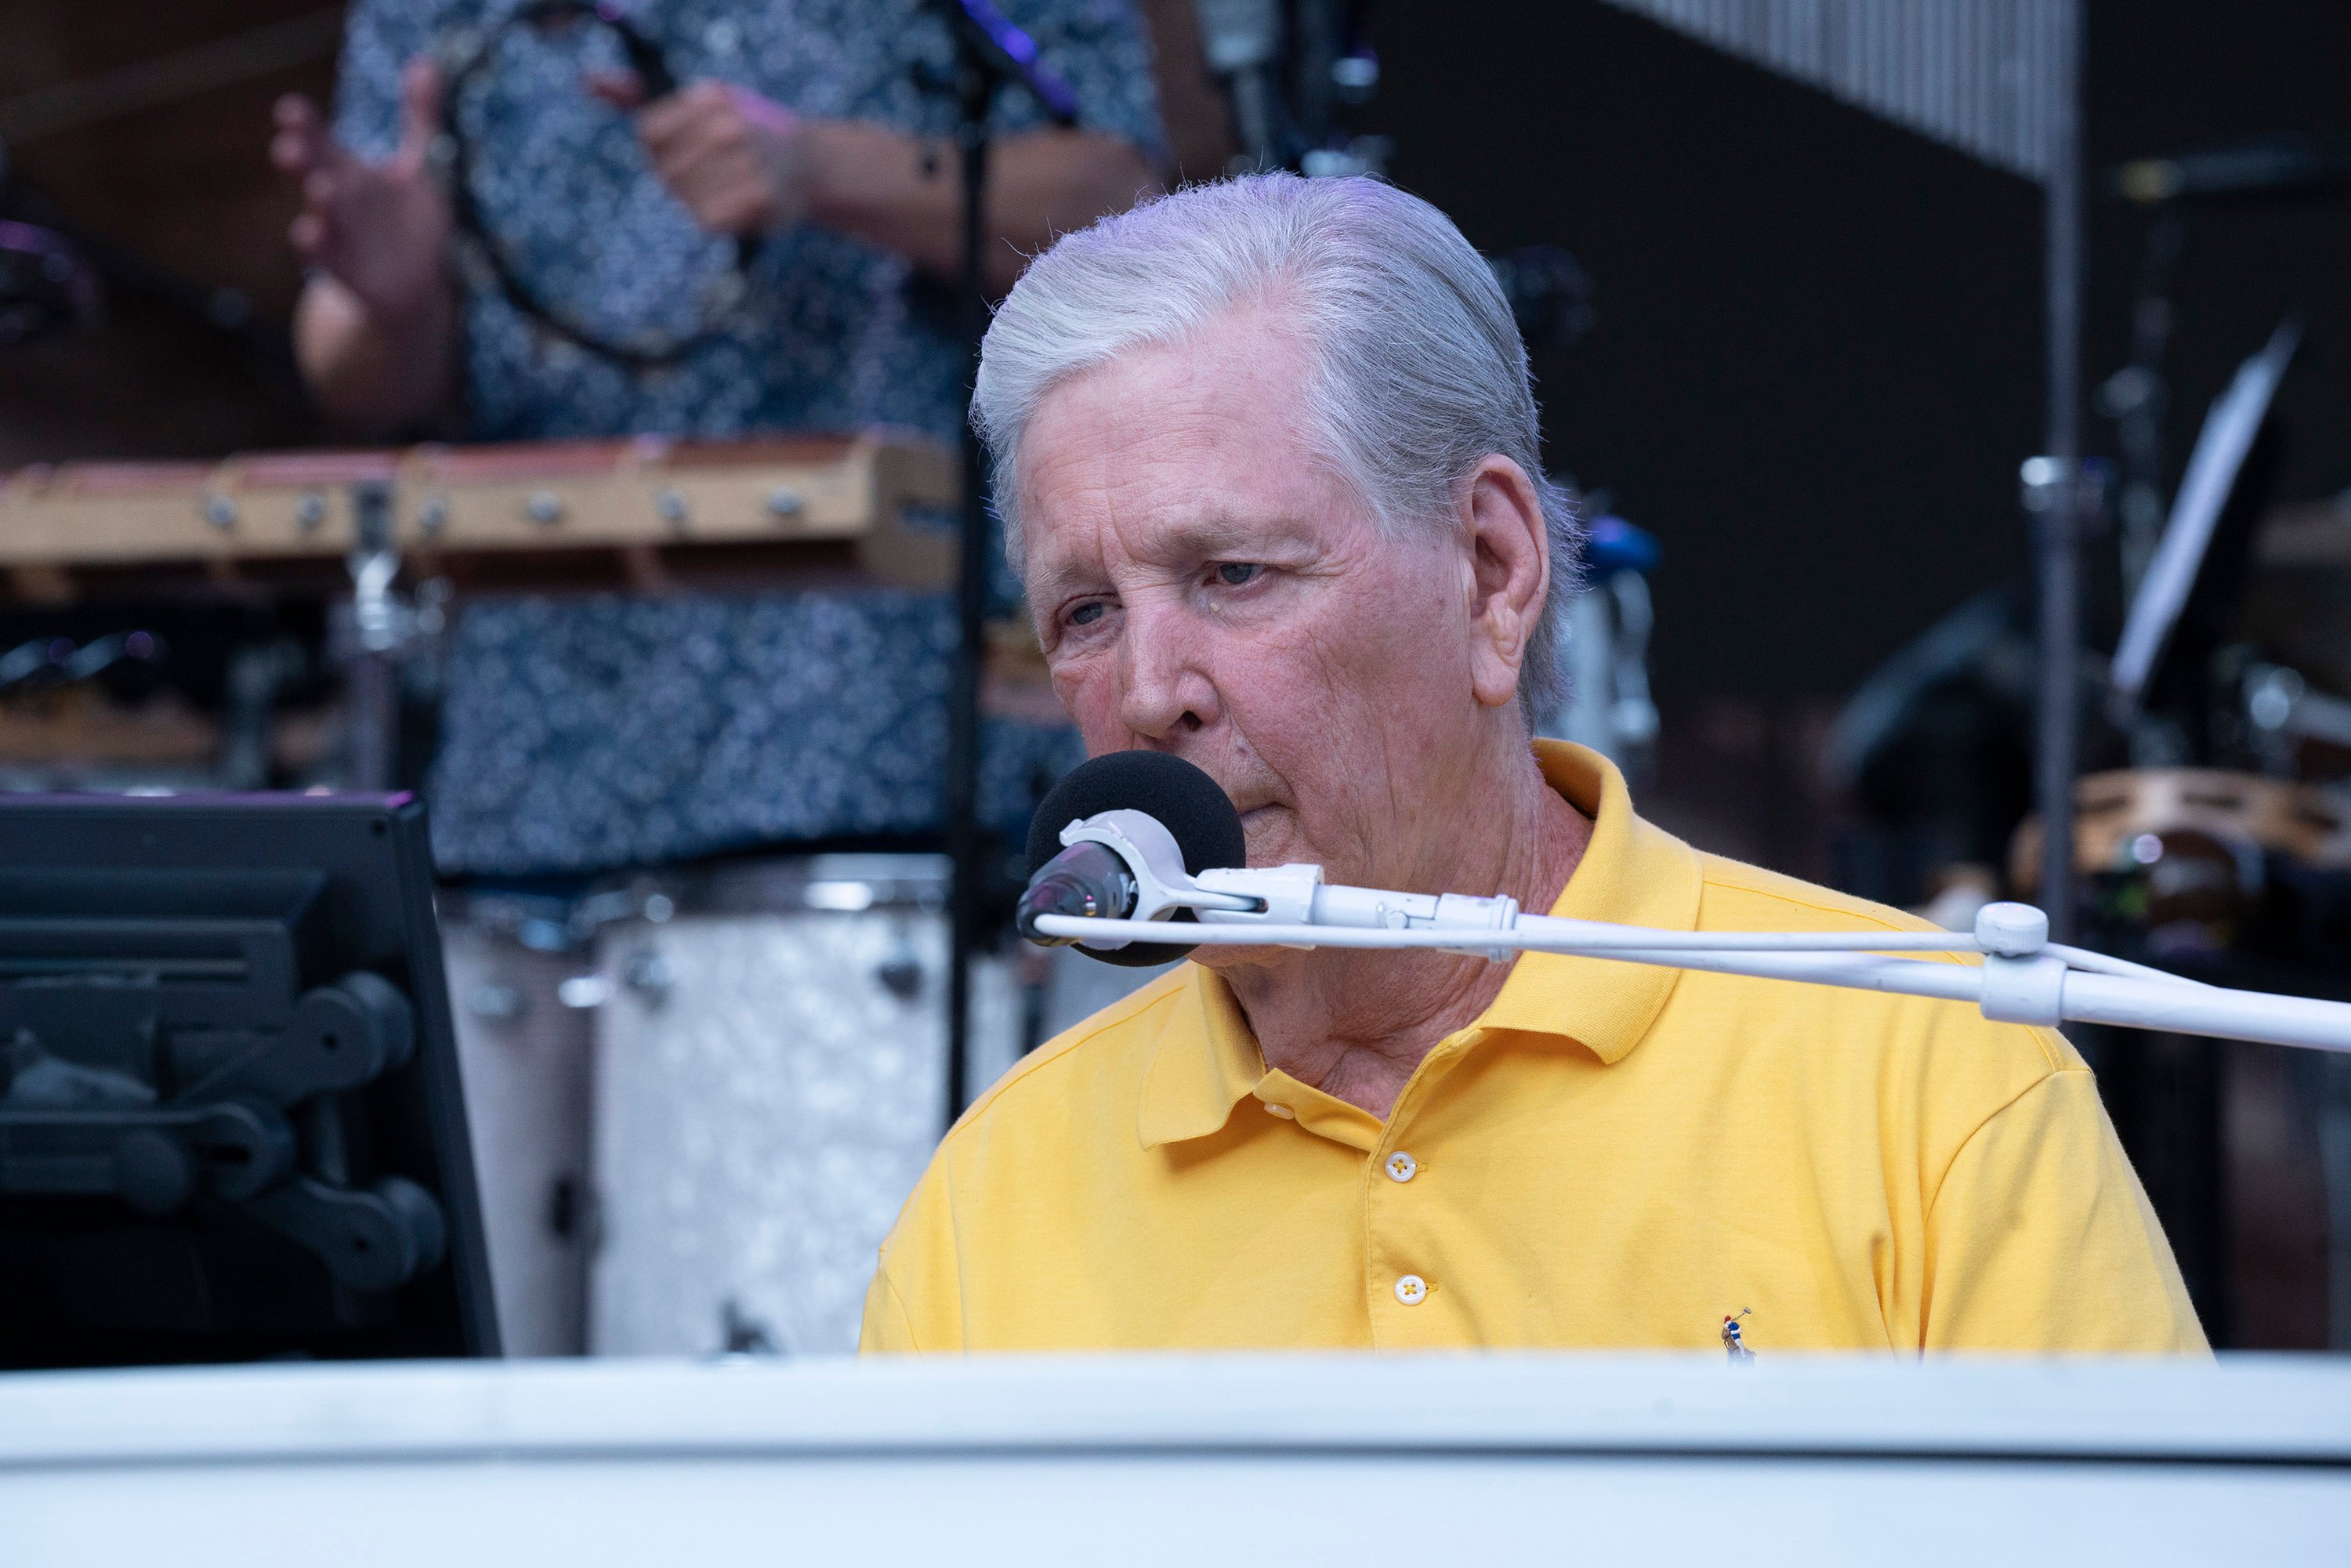 Brian Wilson is performing Beach Boys songs at the Red Rocks Amplitheater